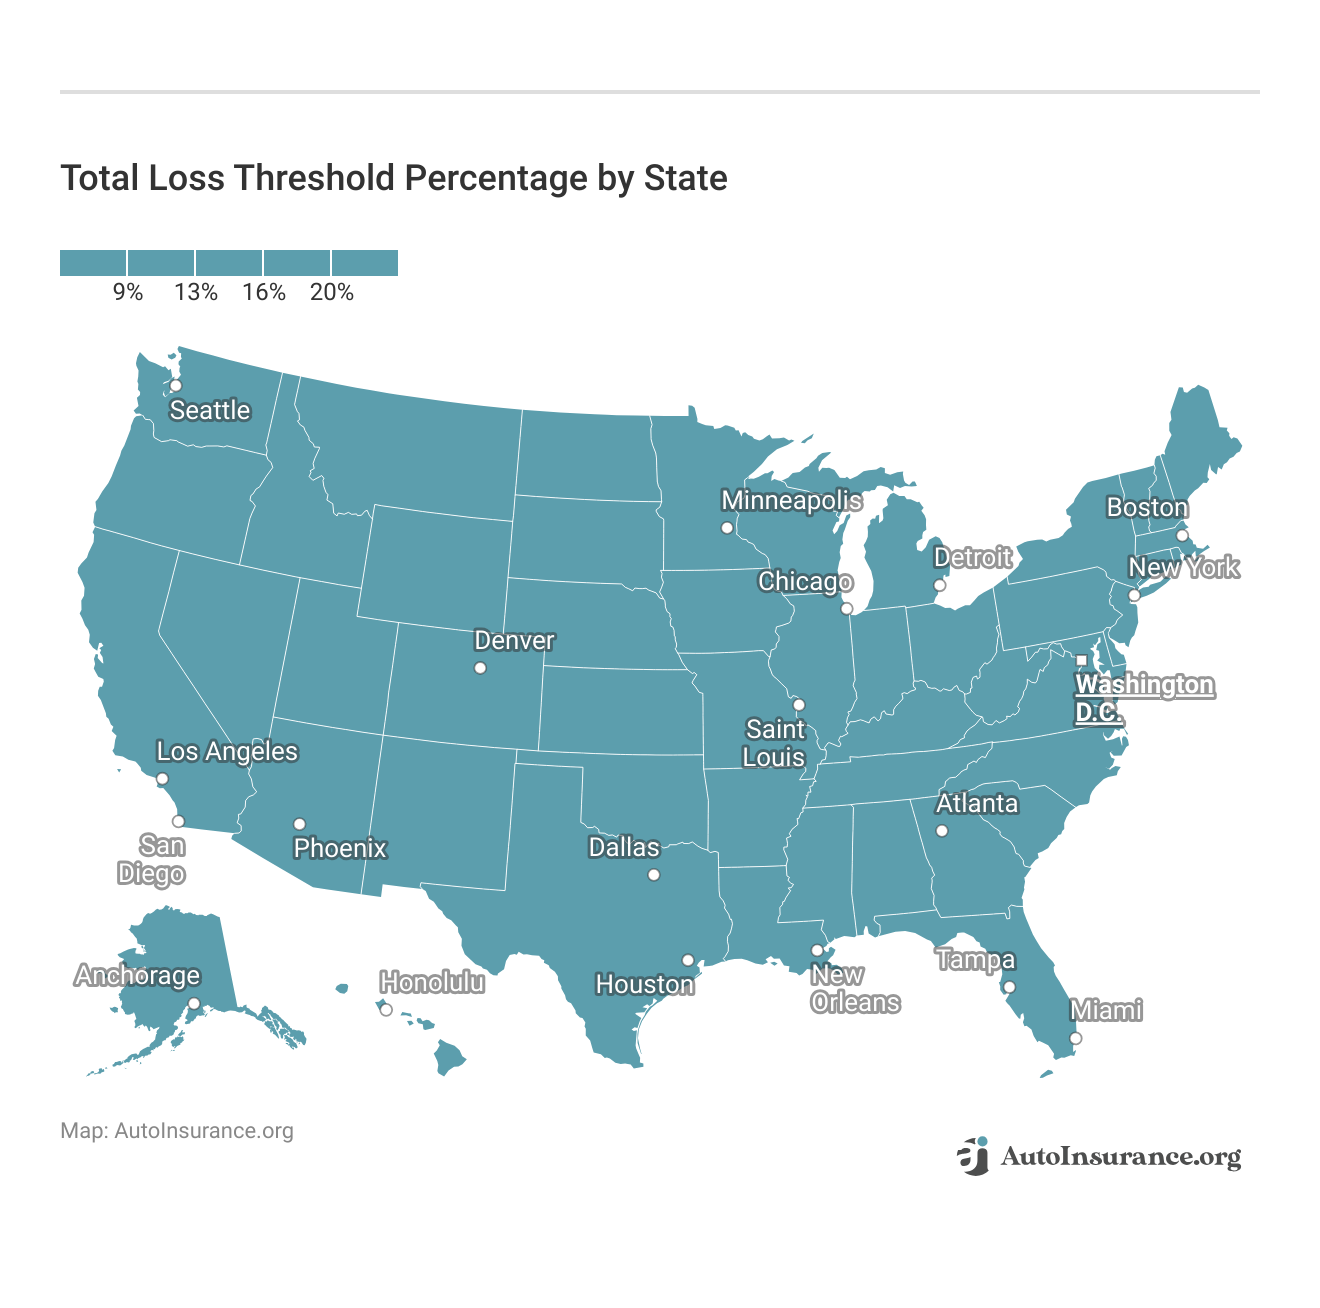 <h3>Total Loss Threshold Percentage by State</h3>